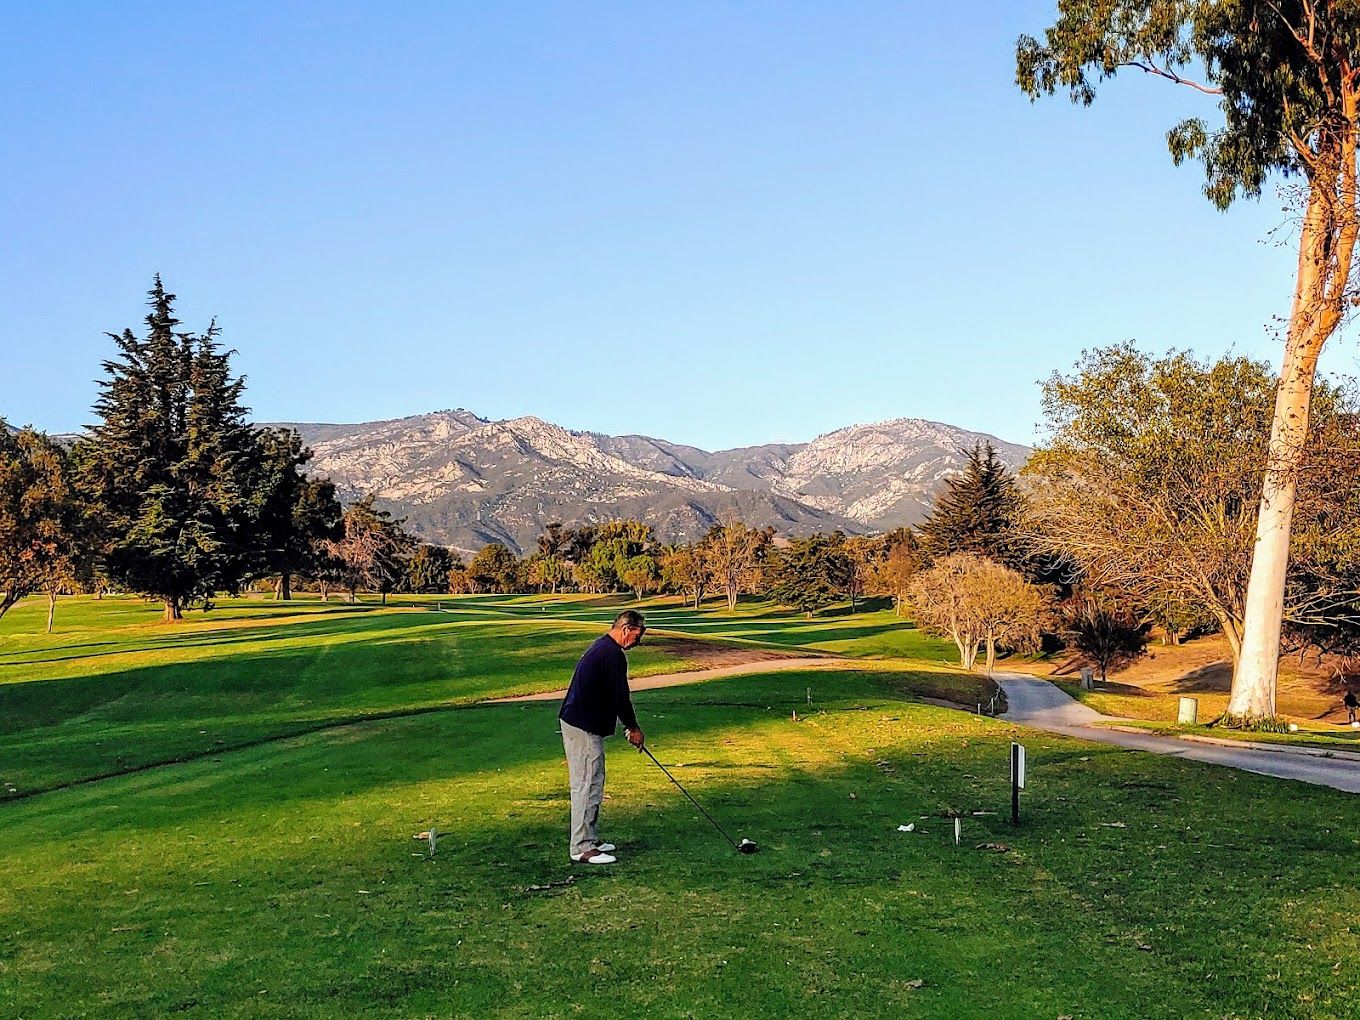 A man in a black sweater sets up to tee off on a hole at Santa Barbara Golf Club, with mountains and blue sky in the background